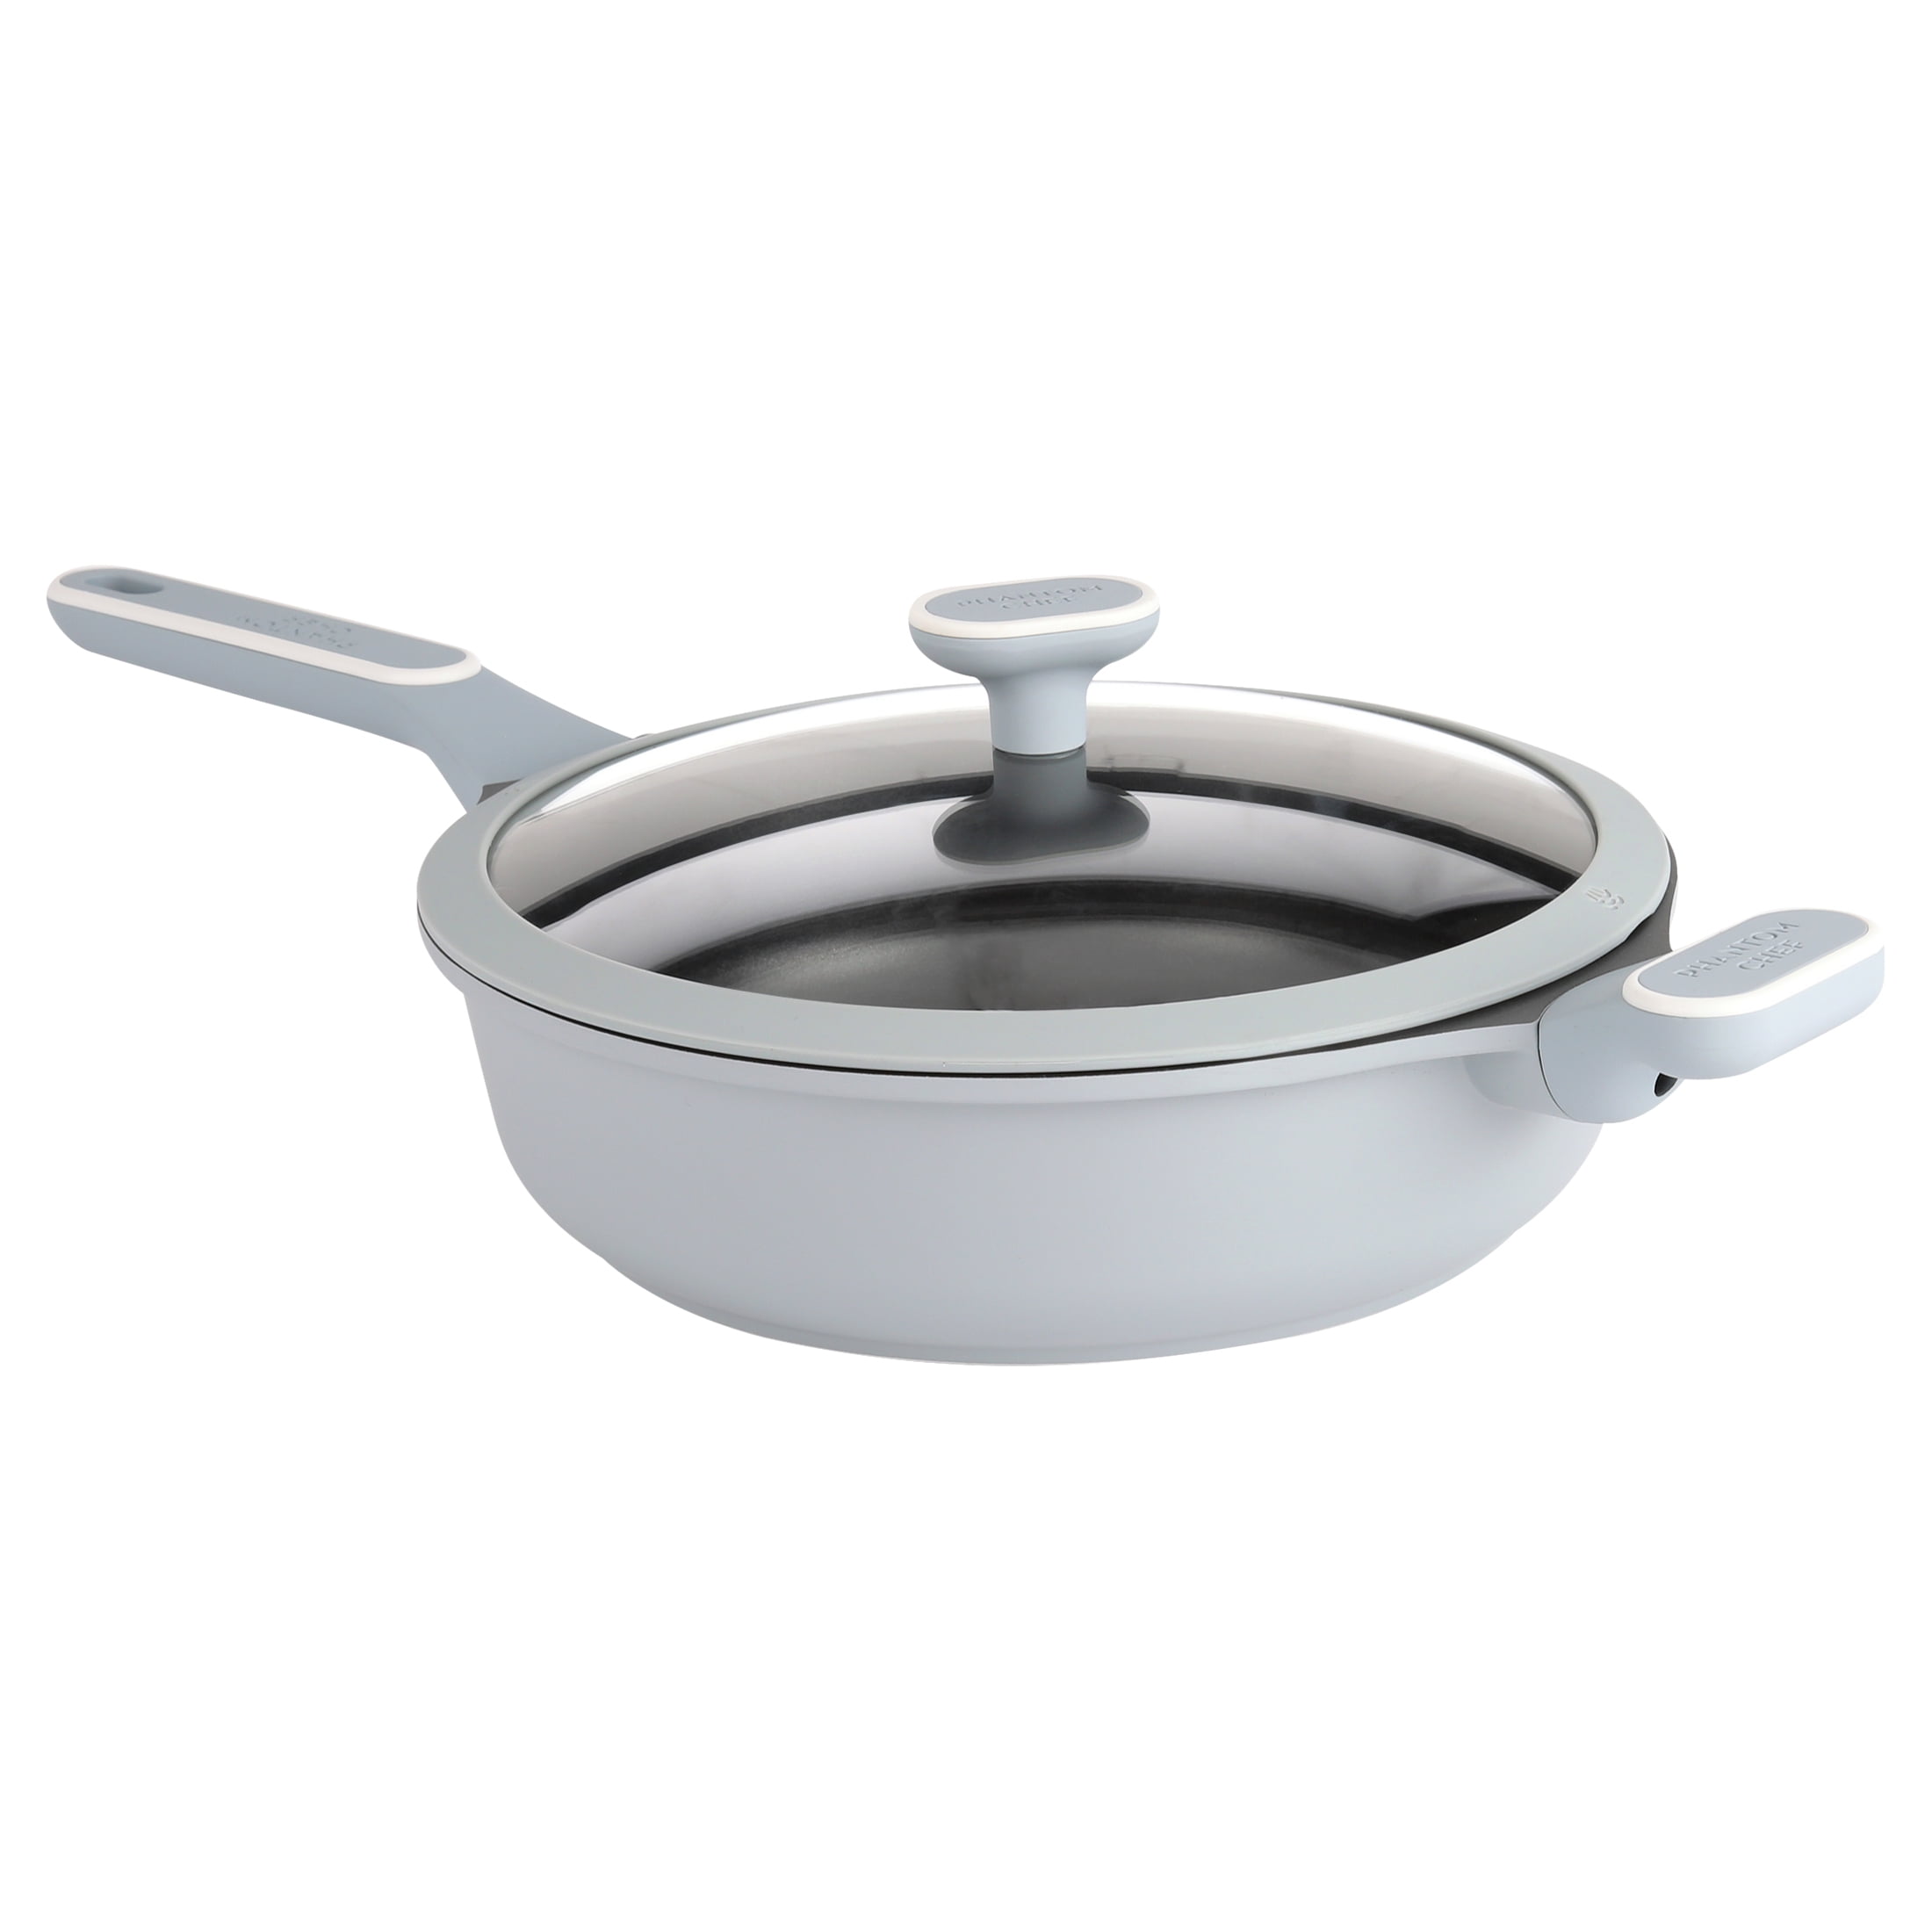 Phantom Chef 11 Deep Frypan 5 Qt Wok | Aluminum Body Non-Stick Ceramic  Coating | With Soft Touch Stay Cool Handle | Dishwasher Safe | Non-Toxic  PFOA